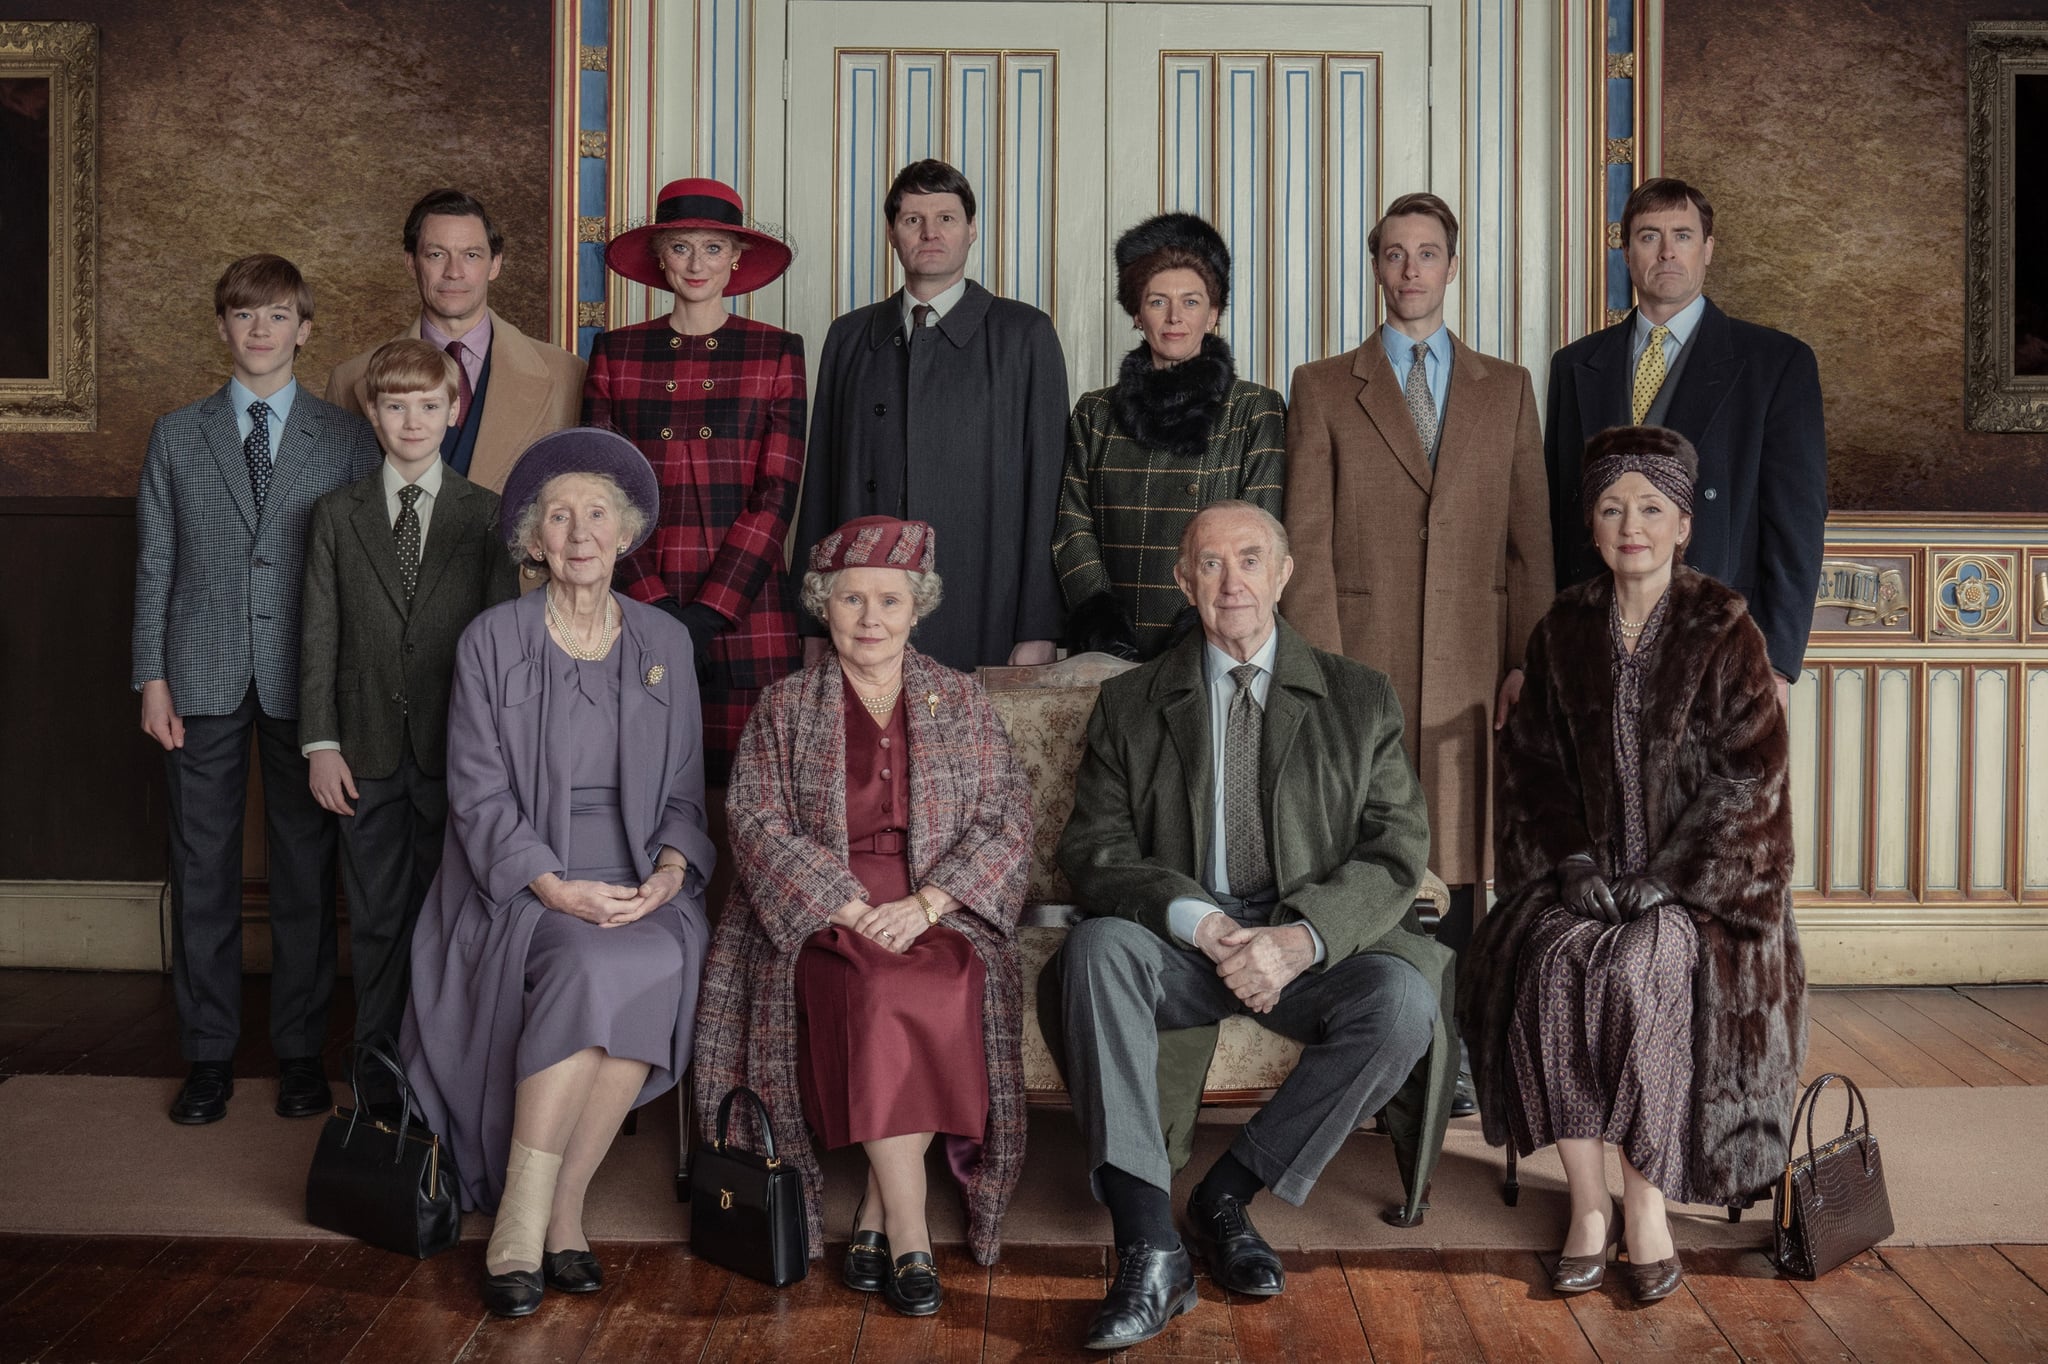 THE CROWN, standing: Senan West as Prince William (left), Will Powell as Prince Harry (2nd from left), Dominic West as Prince Charles (3rd from left), Elizabeth Debicki as Diana Princess of Wales (4th from left);  seated: Imelda Staunton as Queen Elizabeth II (2nd from left), Jonathan Pryce as Prince Philip (2nd from right), Lesley Manville as Princess Margaret (right), (Season 5, airs November 9, 2022).  photo: Keith Bernstein/Netflix/Courtesy: Everett Collection